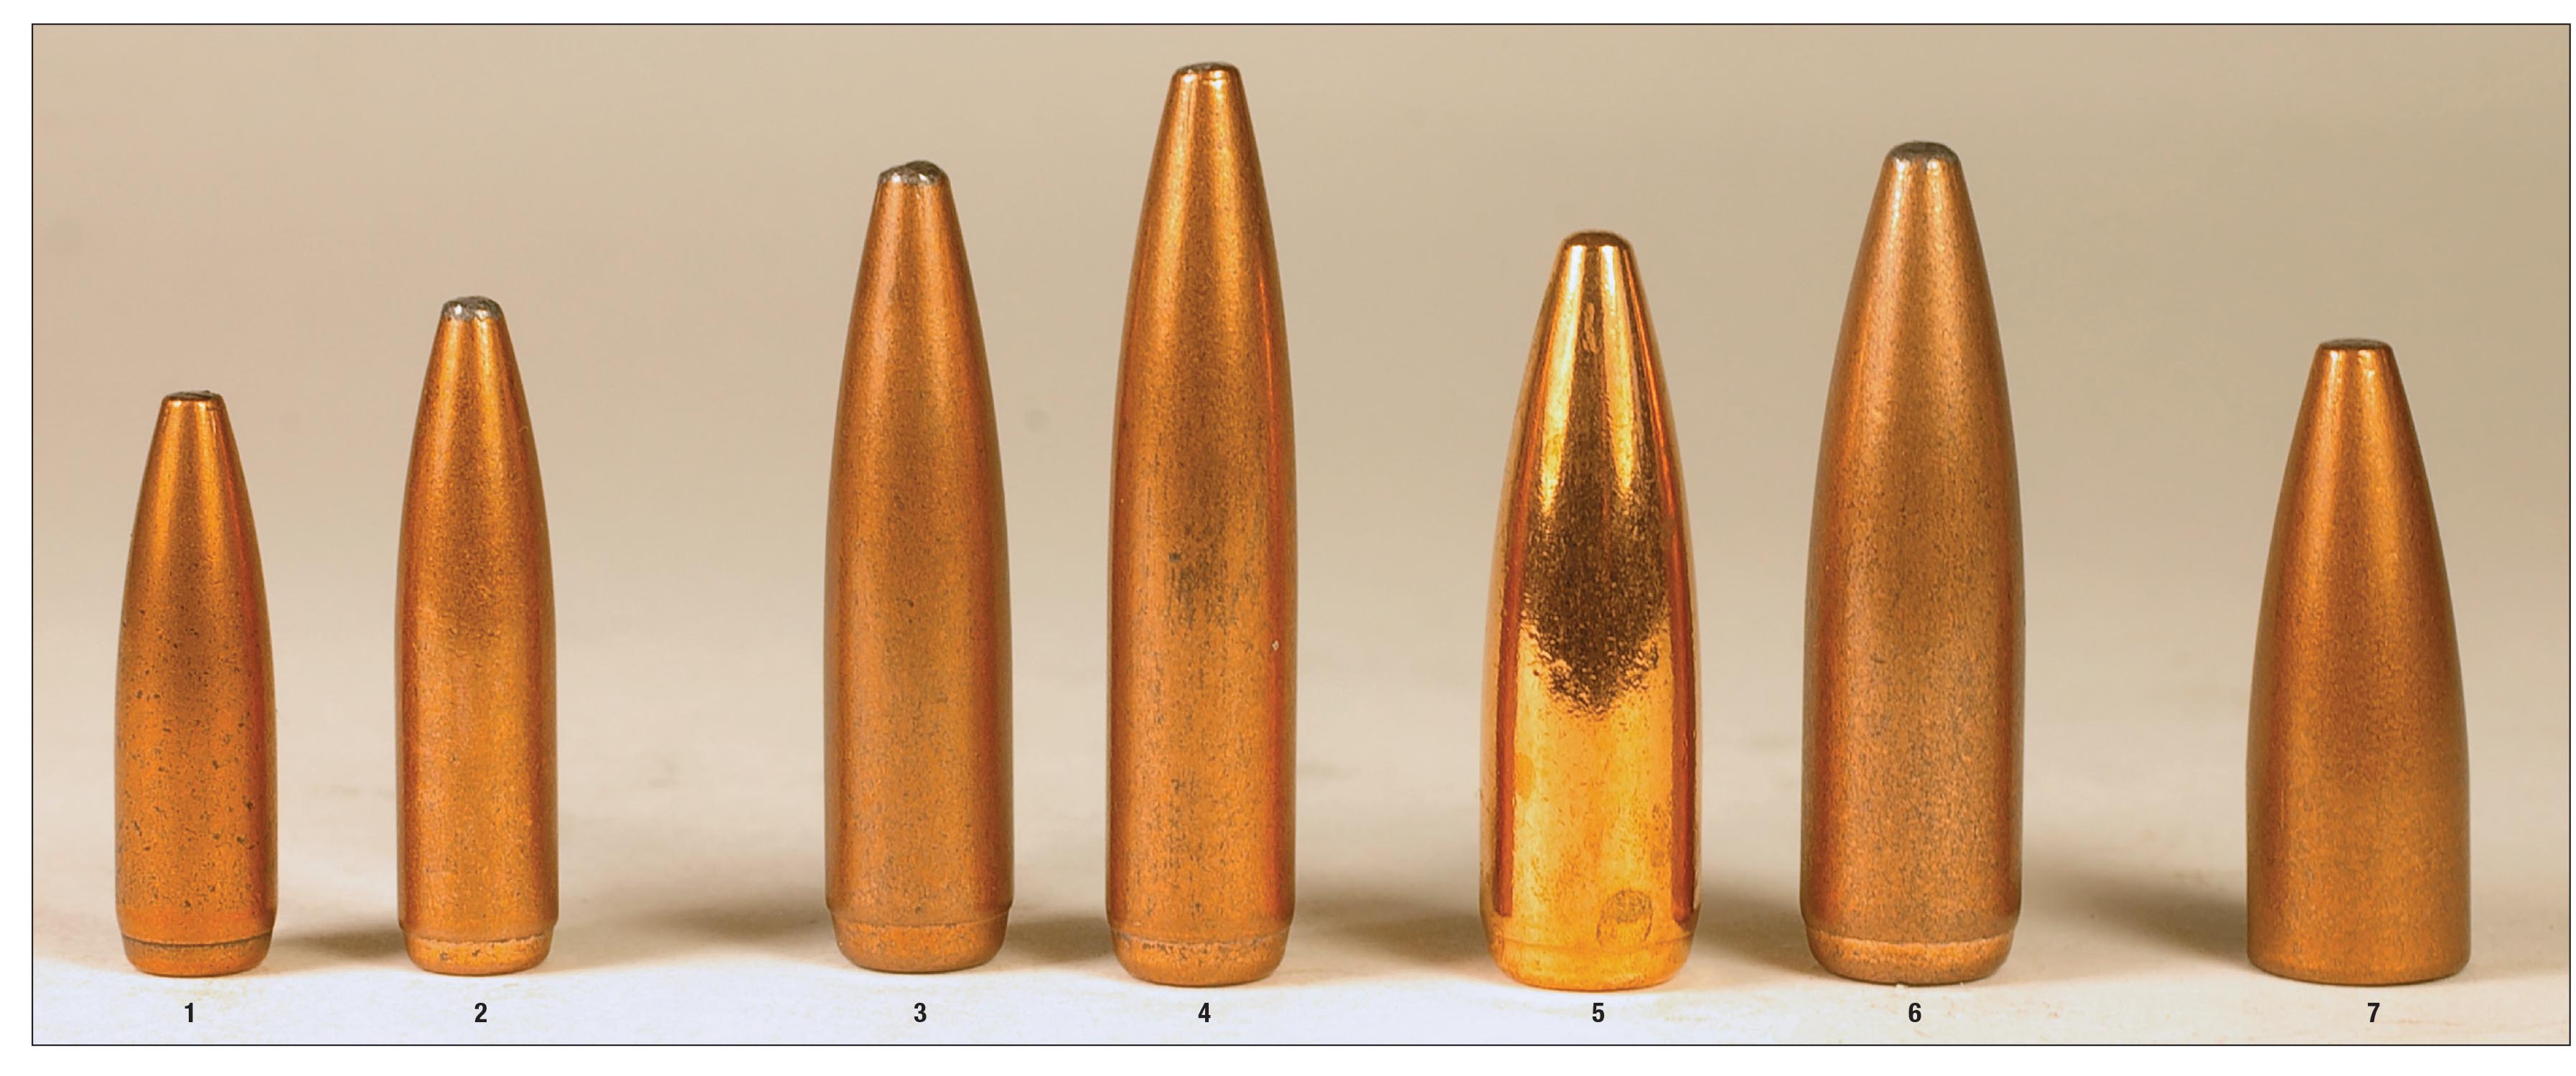 These Speer Gold Dot rifle bullets were handloaded in several different cartridges from .223 Remington to the 7.62x39. They include .22-caliber (1) 62- and (2) 75-grain examples, 6.5mm (3) 120- and (4) 140-grain bullets, .30-caliber (5) 150- and (6) 168-grain examples and a .30-caliber (.310 inch) (7) 123-grain bullet.